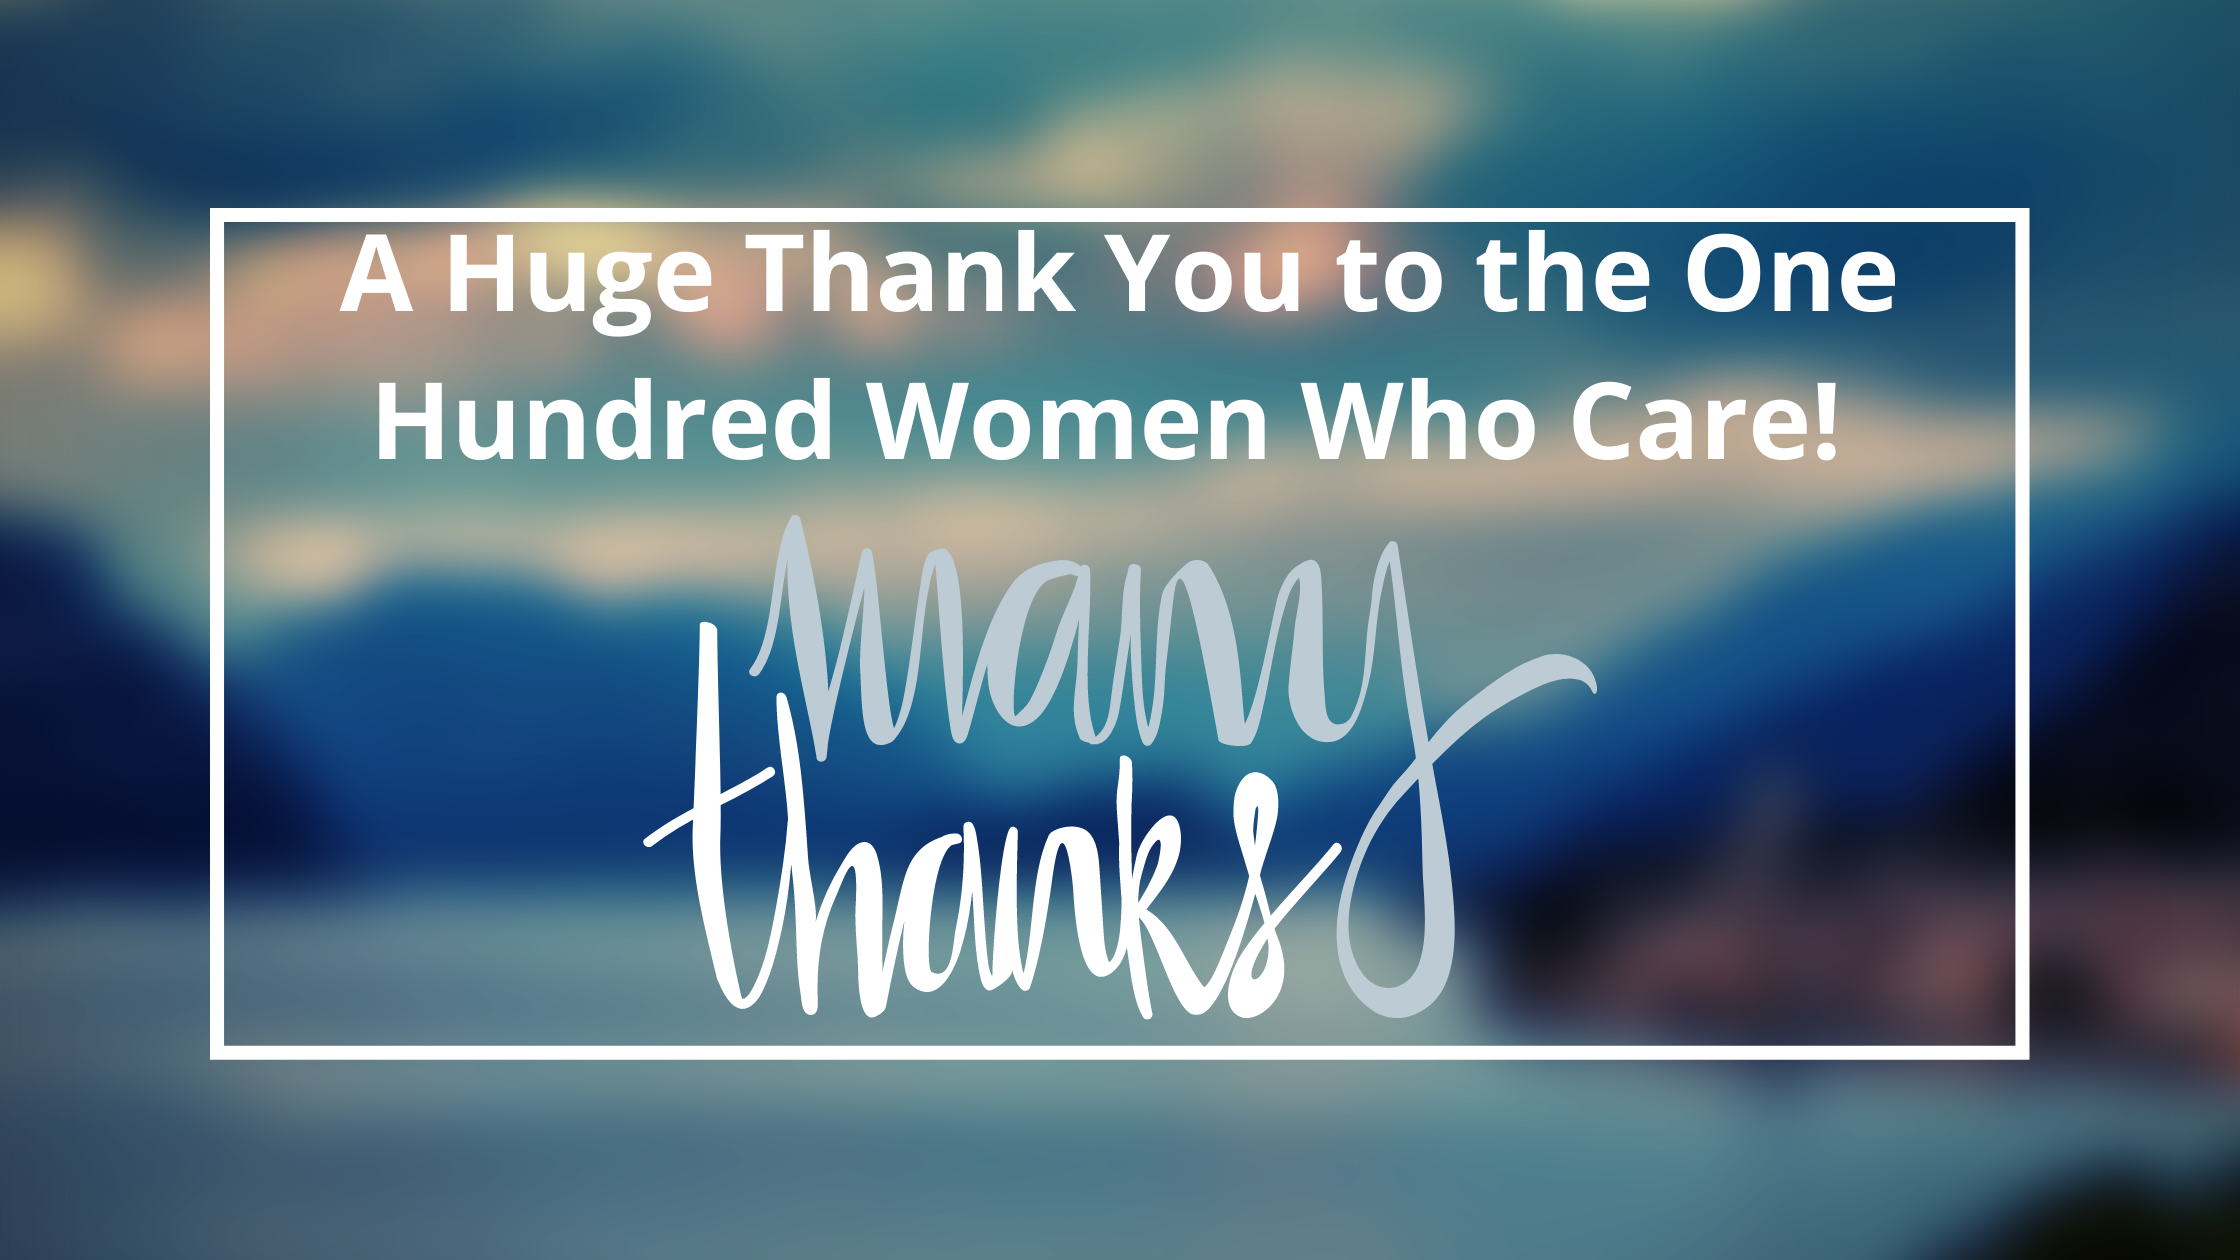 Featured image for “Thank You!”